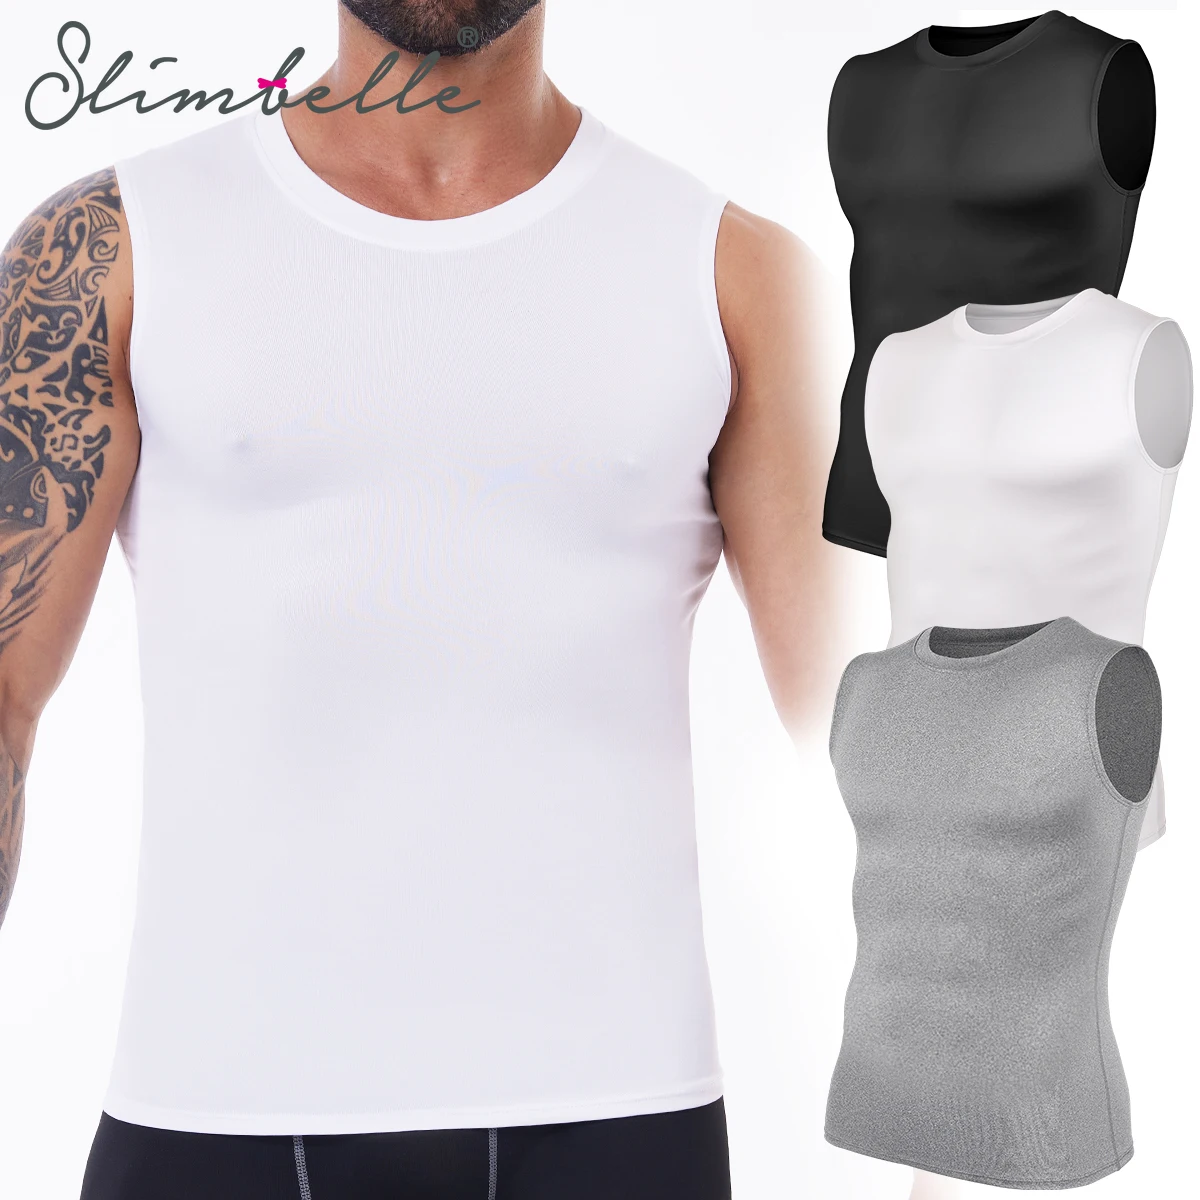 Men Body Shaper Vest Compression Shirts Slimming Tummy Control Tight Tank Tops Shapewear Workout Abs Abdomen Chest Undershirt mens slimming body shaper compression shirts workout abdomen undershirt shapewear tummy control tight shapers tank tops